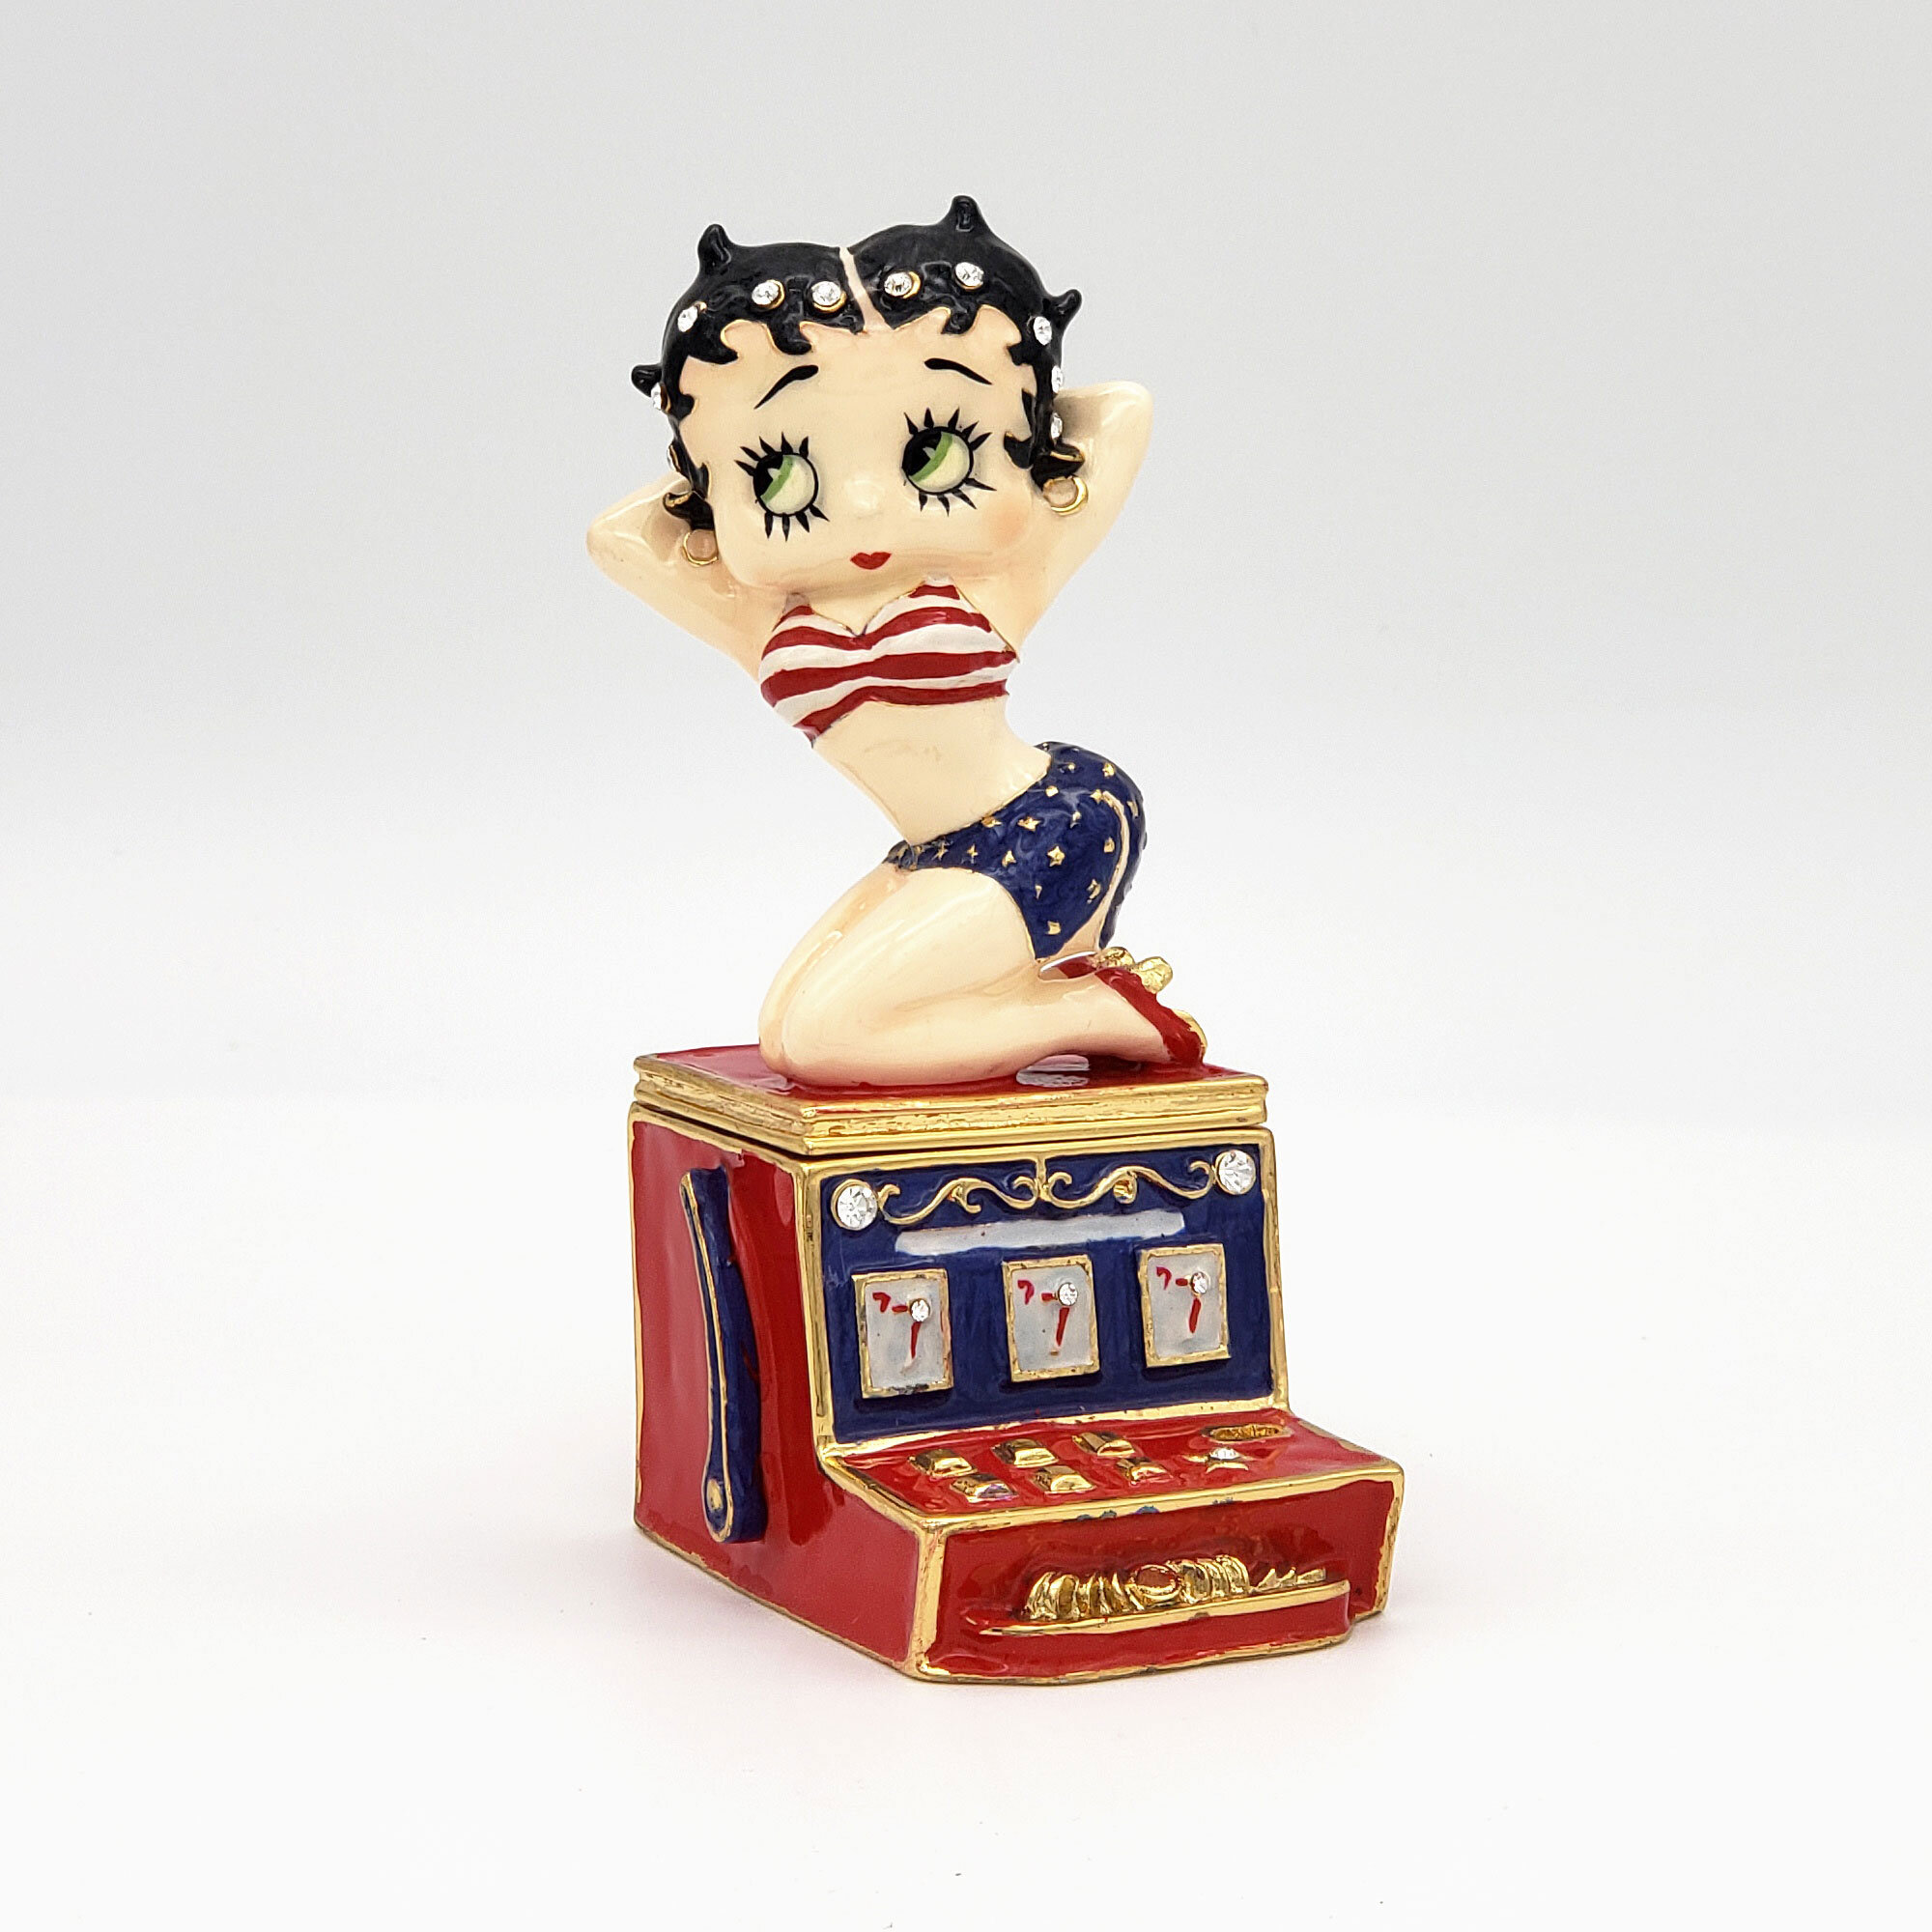 TRINKET JEWELLERY NESTING STACKING BETTY BOOP LOVE HEART GIFT BOXES,SET OF FIVE 